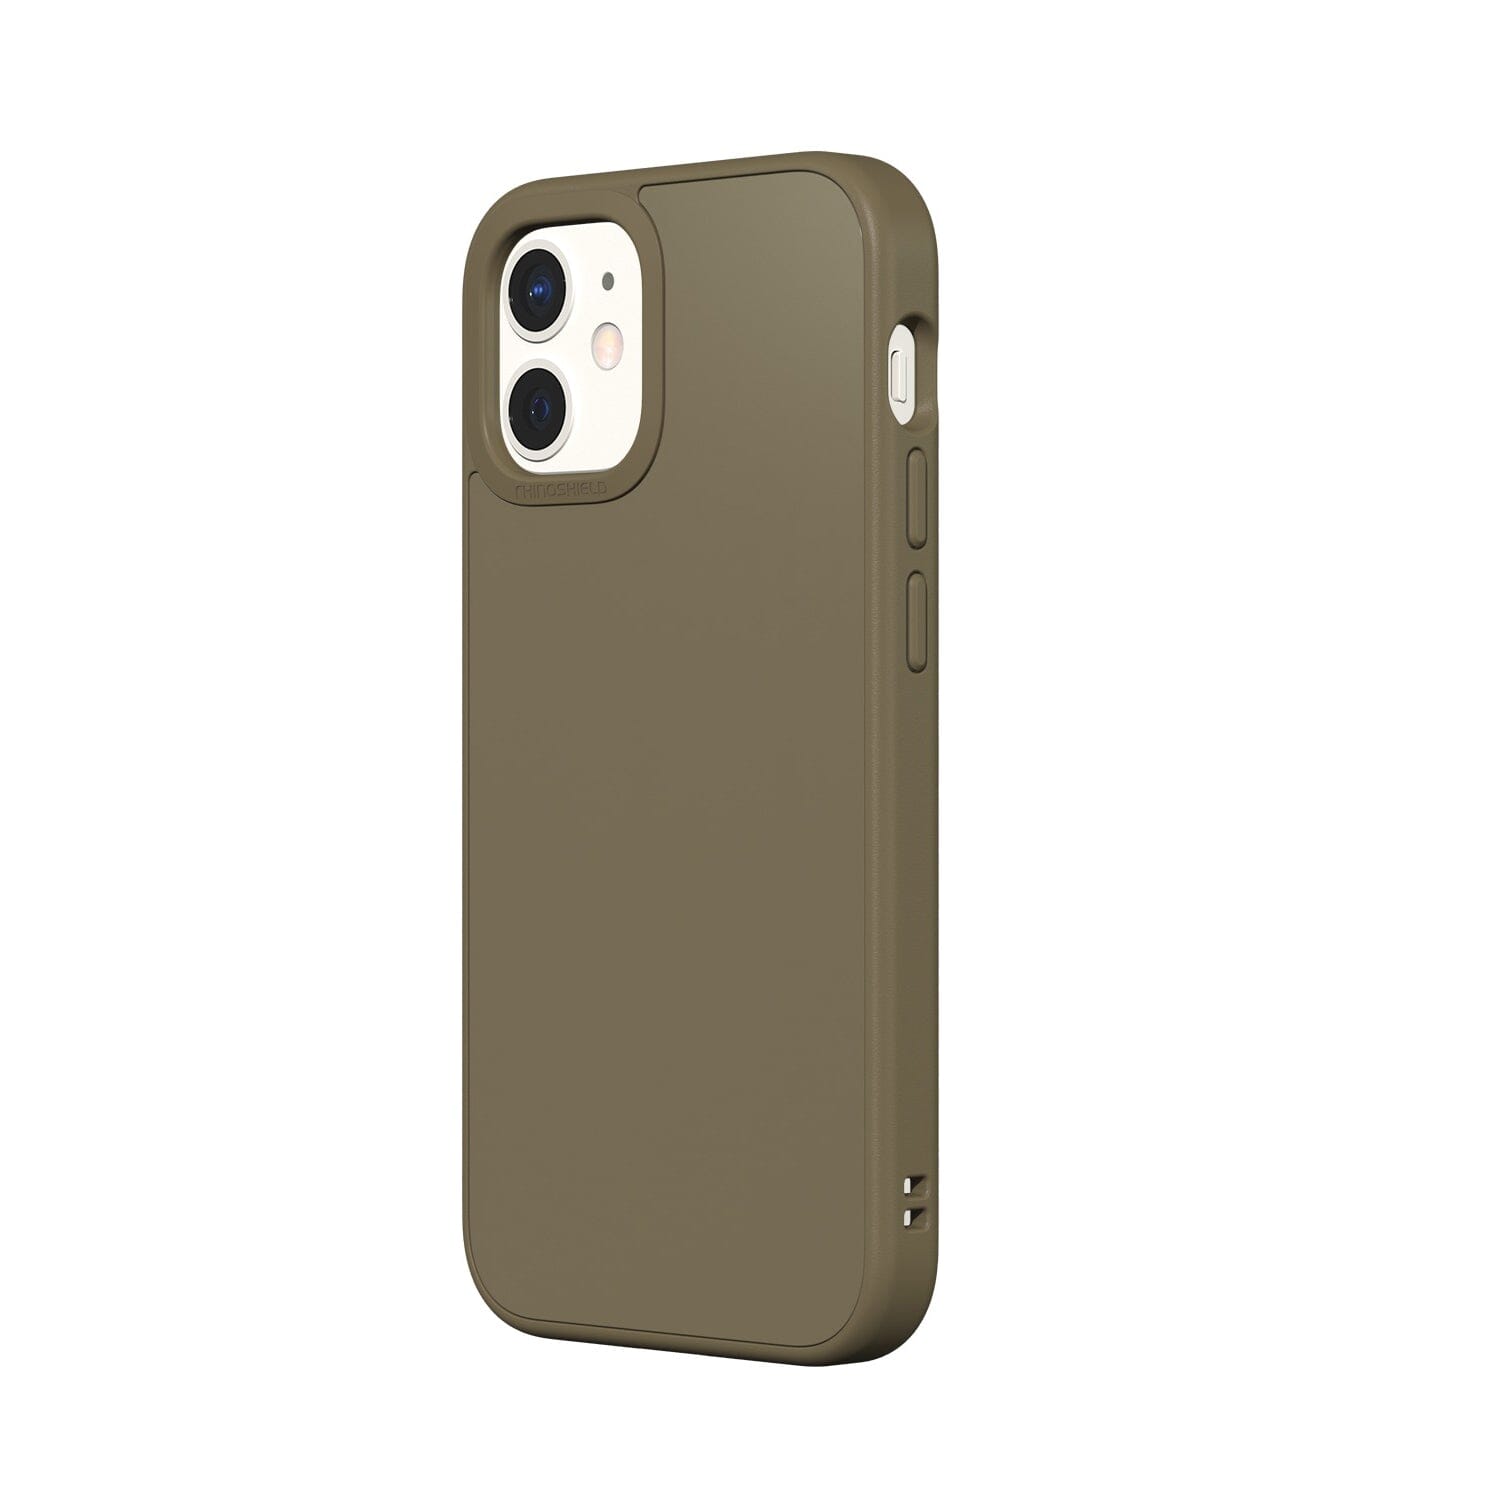 RhinoShield SolidSuit Protective Case with Premium Finish for iPhone 12 Series (2020) iPhone 12 Series RhinoShield iPhone 12 mini 5.4" Classic Clay 